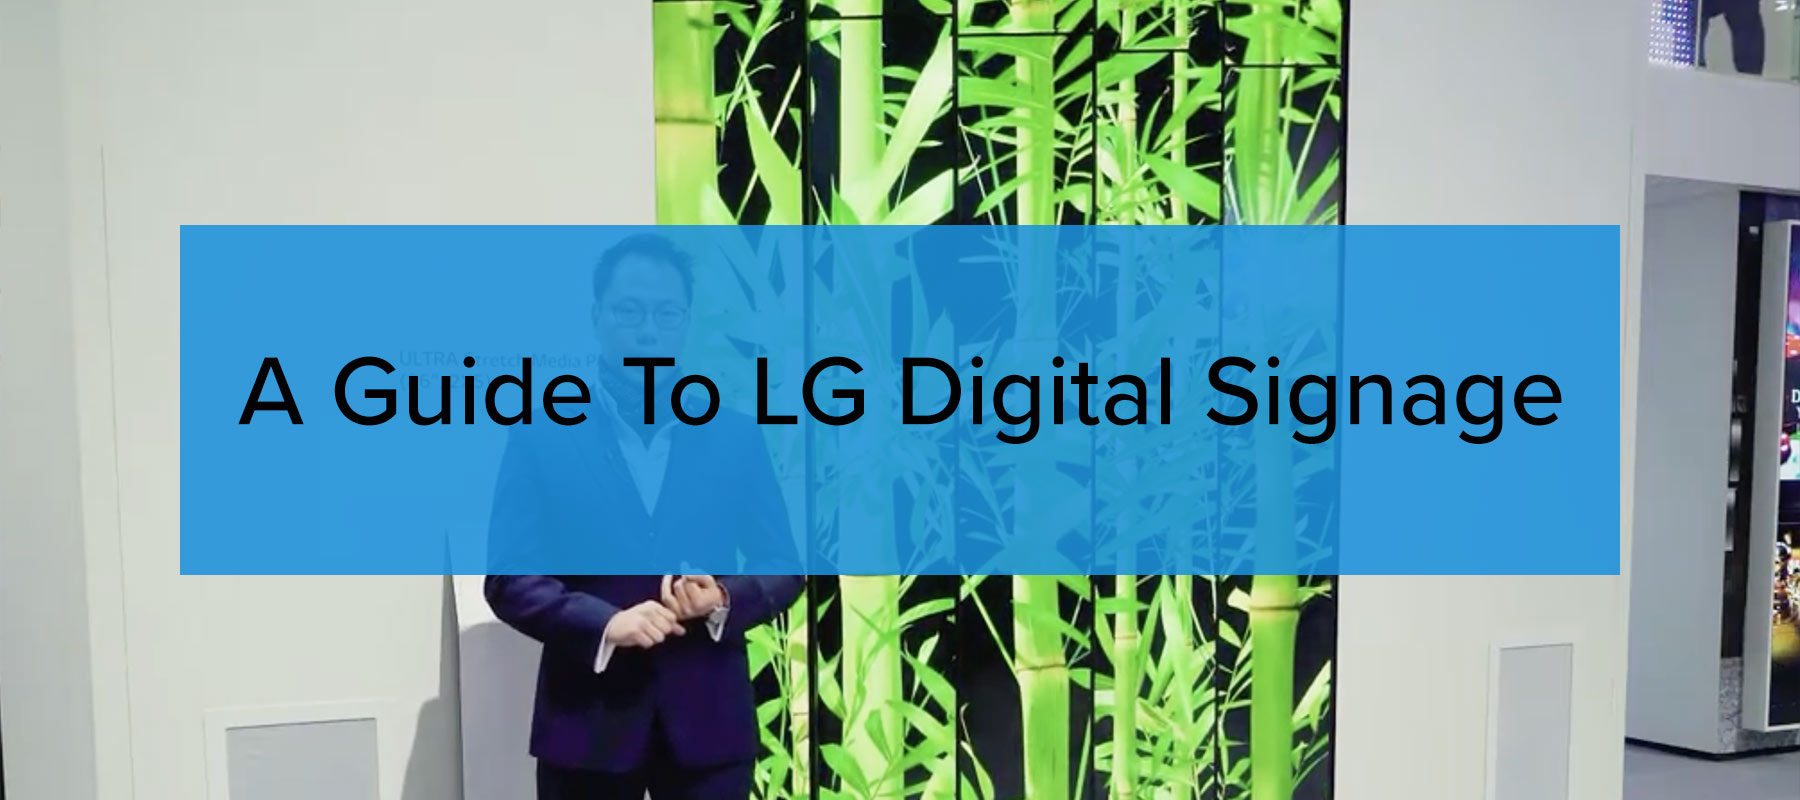 A Guide To LG Digital Signage